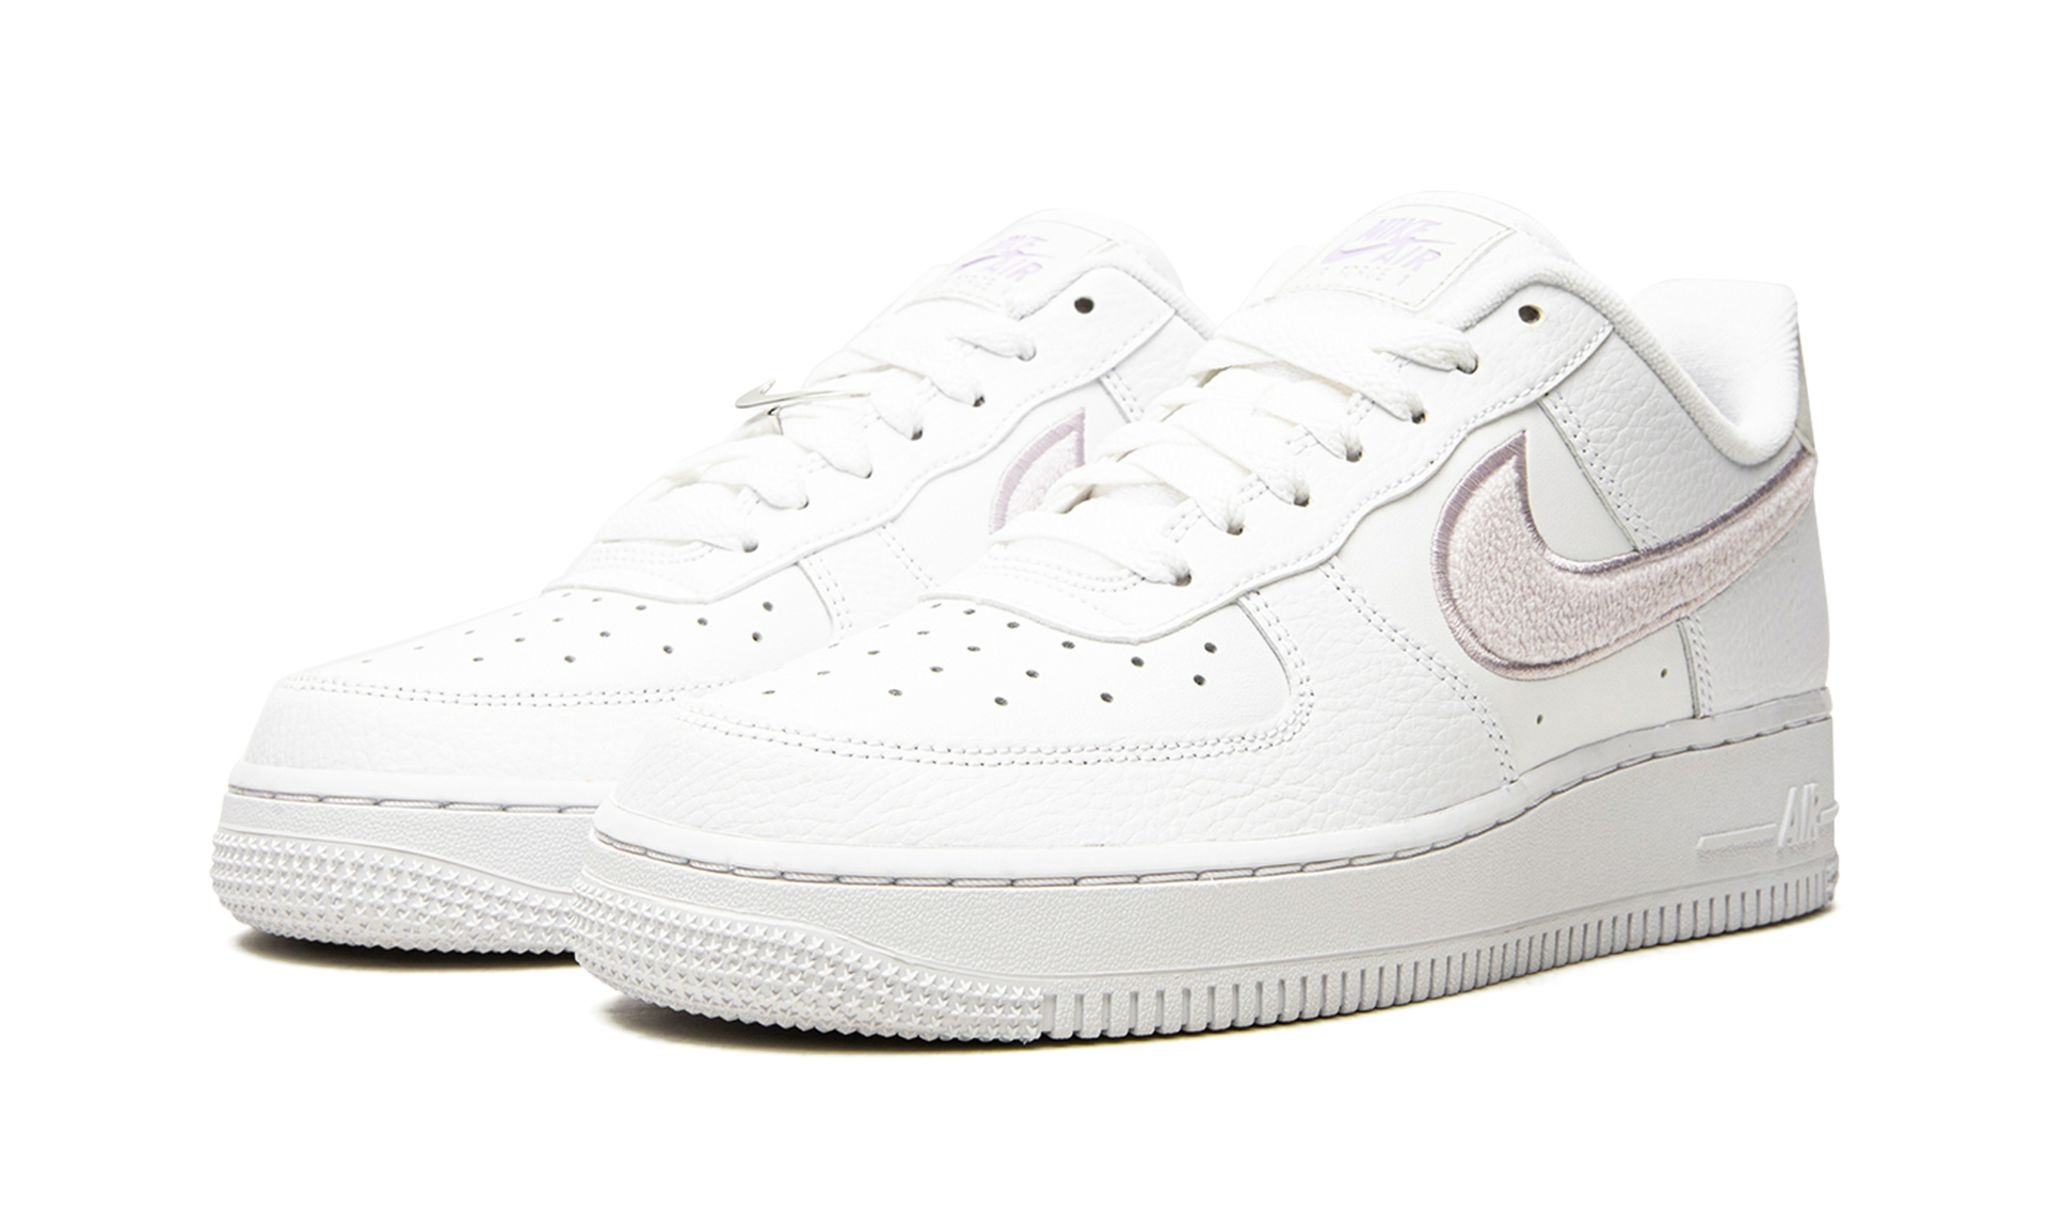 WMNS Air Force 1 Low "Chenille Swoosh - Sea Glass" - 2